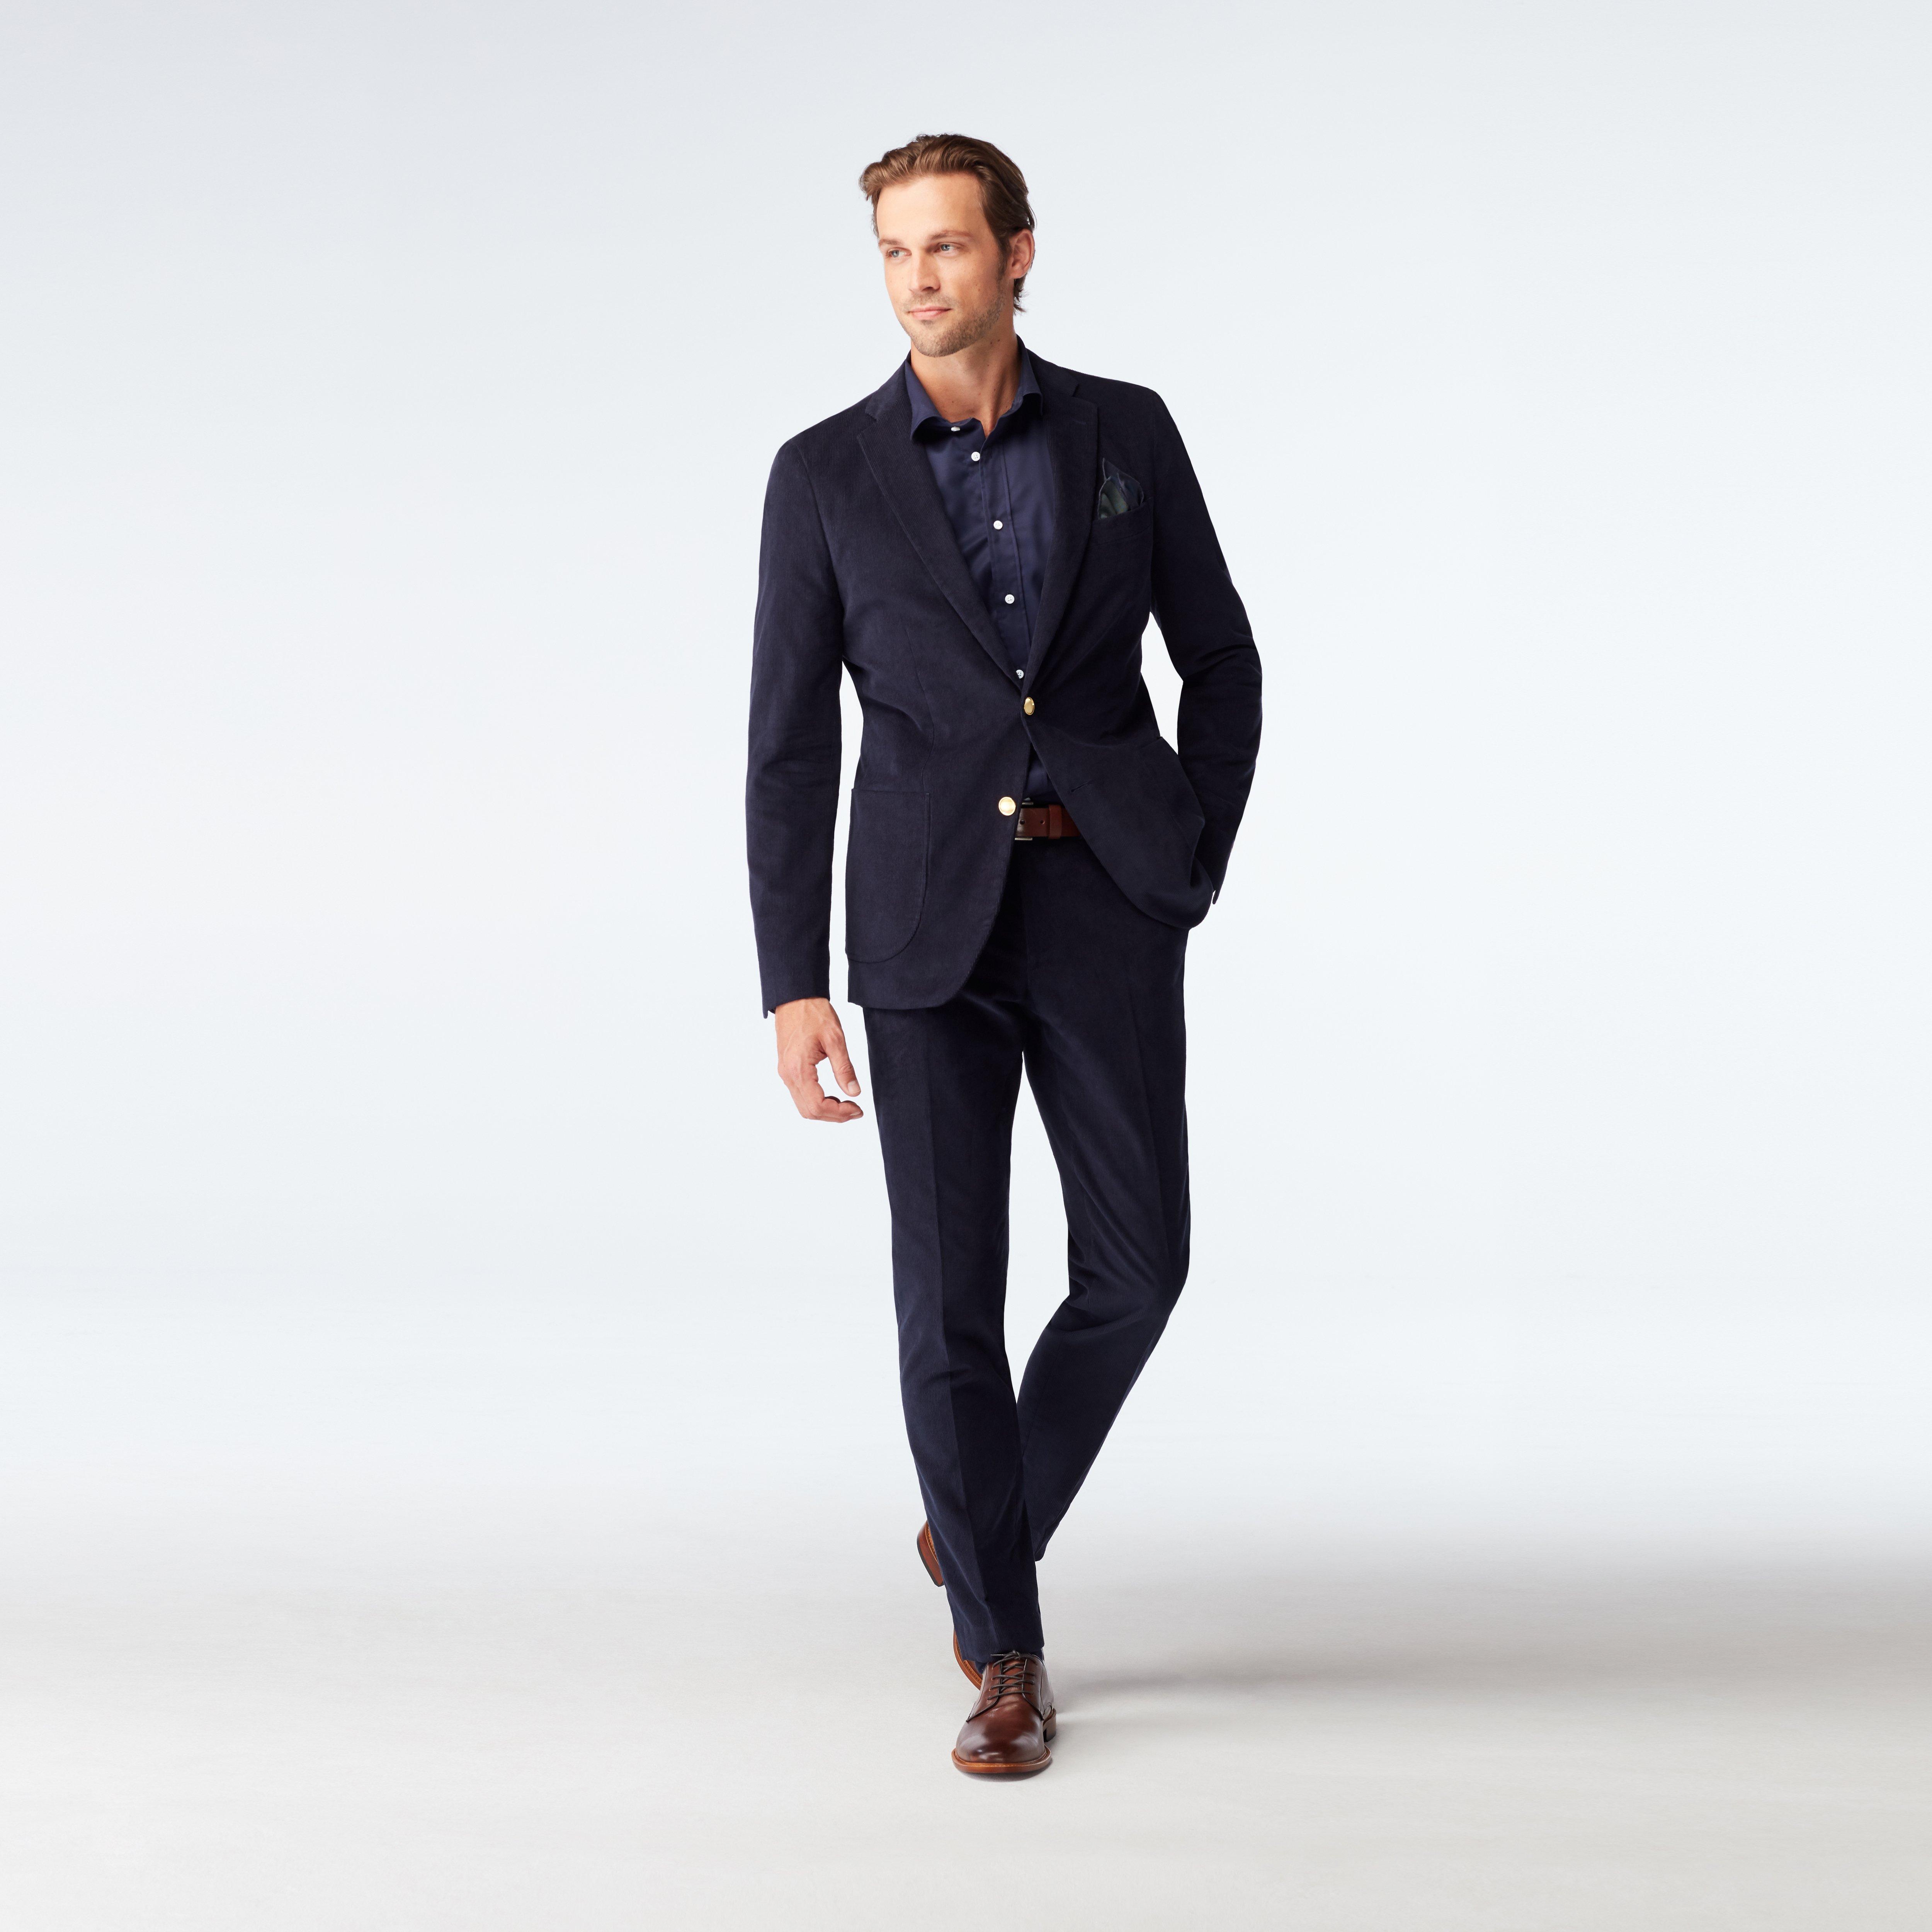 Custom Suits Made For You - Flaxton Corduroy Navy Suit | INDOCHINO